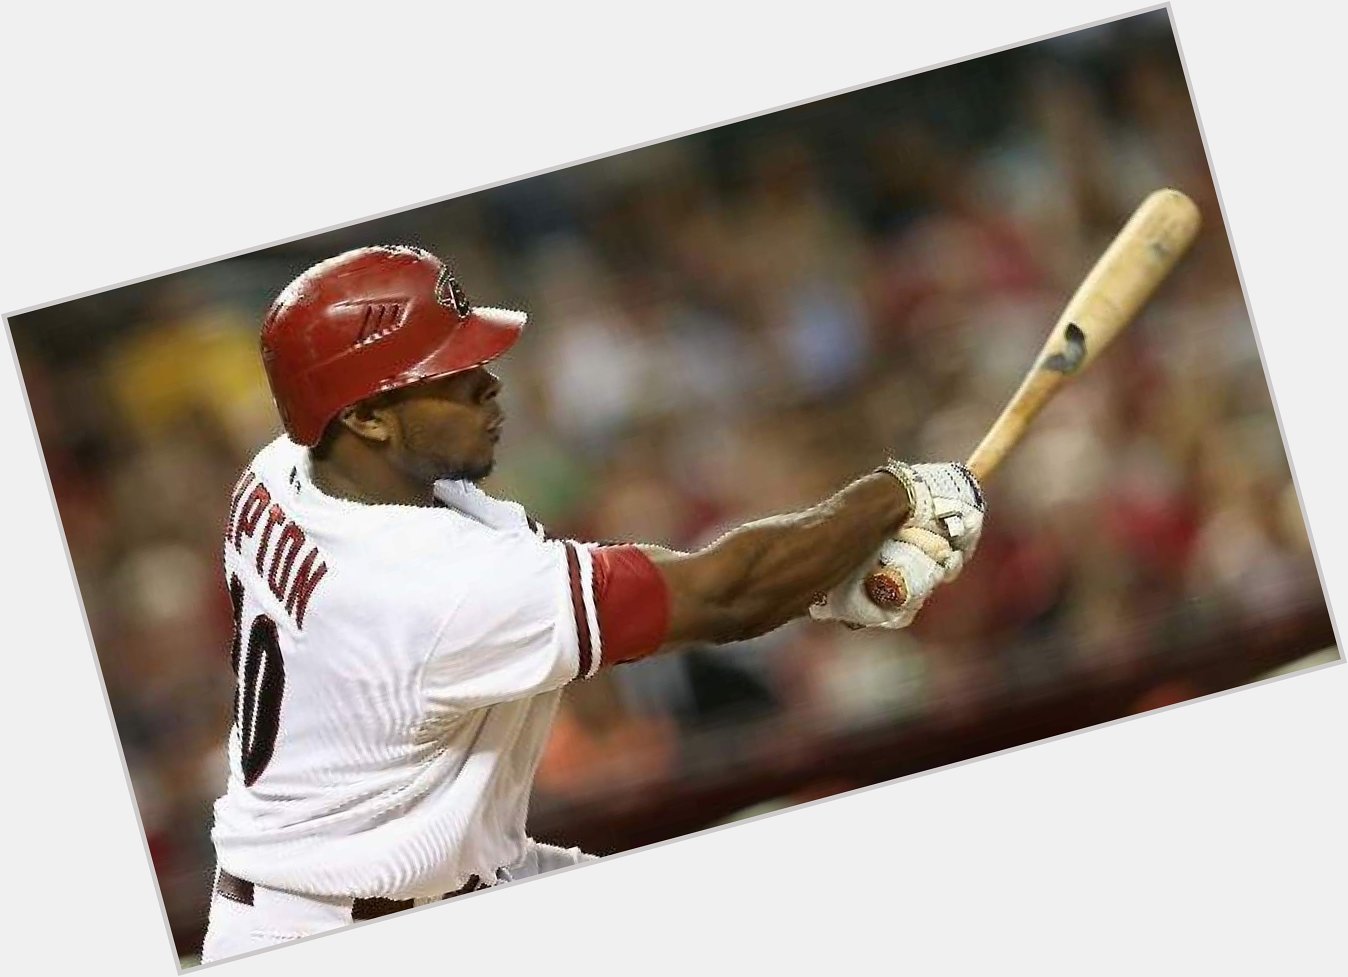 Happy birthday to former number 1 pick overall and 4 time All Star Justin Upton 